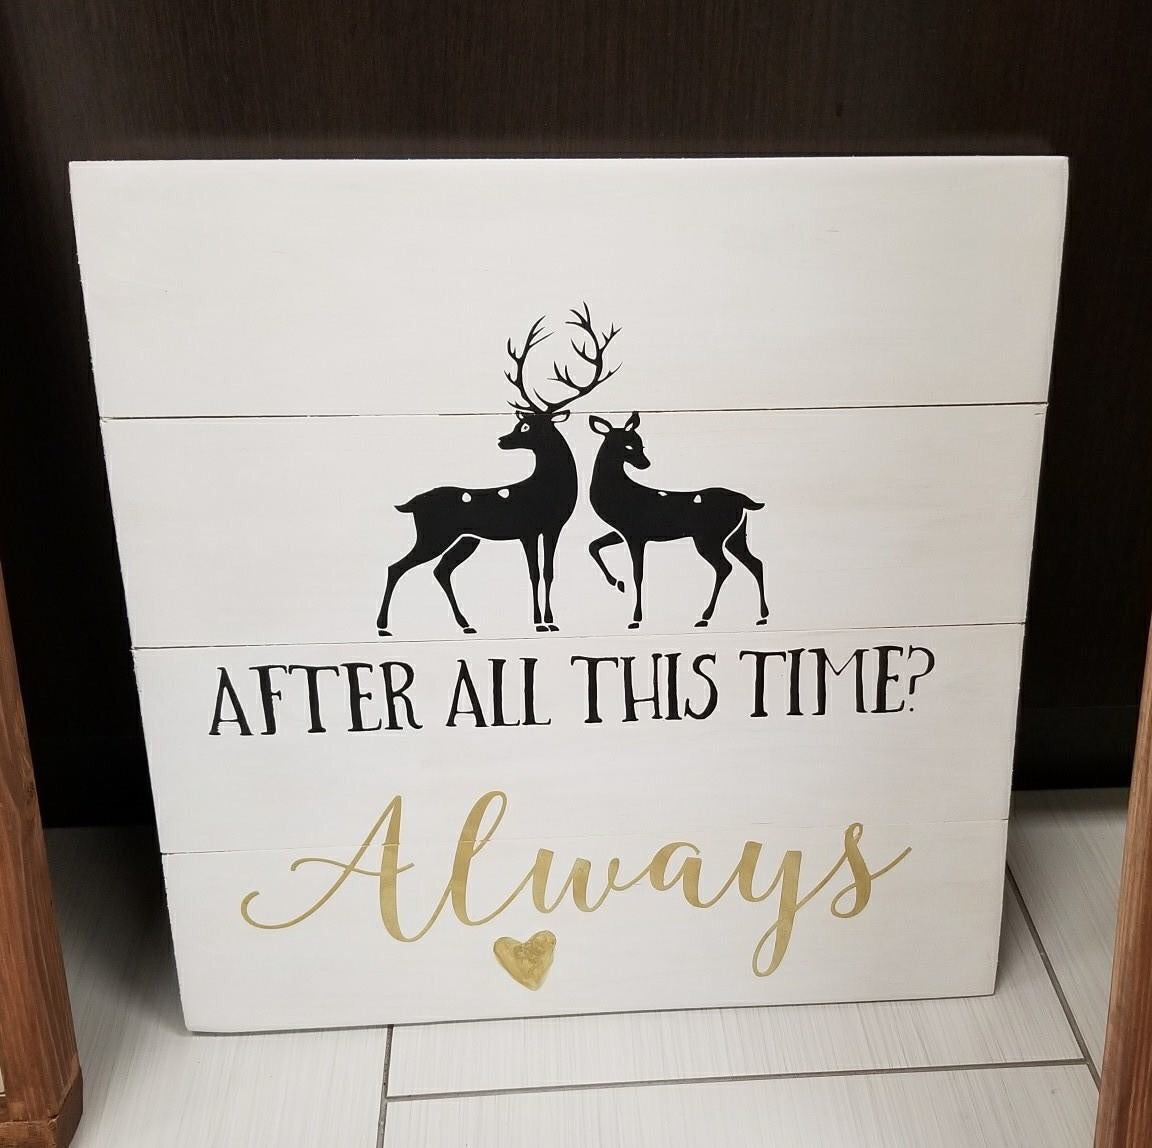 HP - After all this time? Always